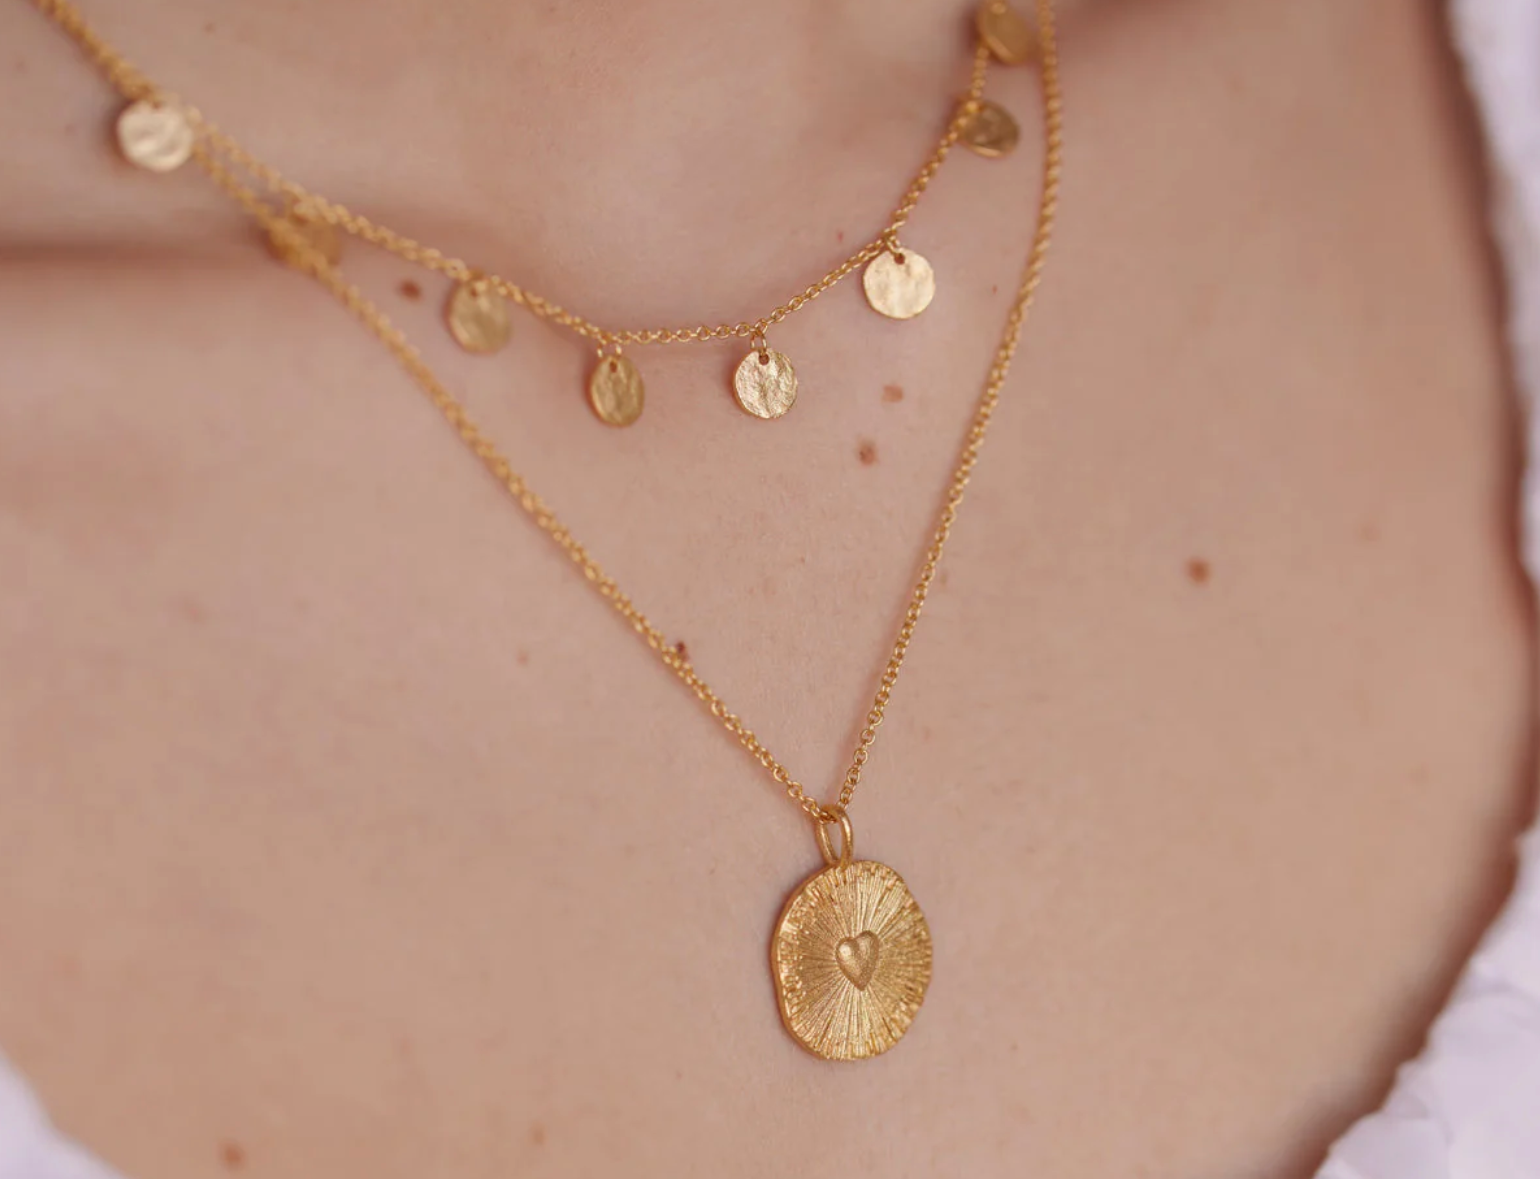 Golden Rules On How to Take Care of a Gold-Plated Pendant and Shine On